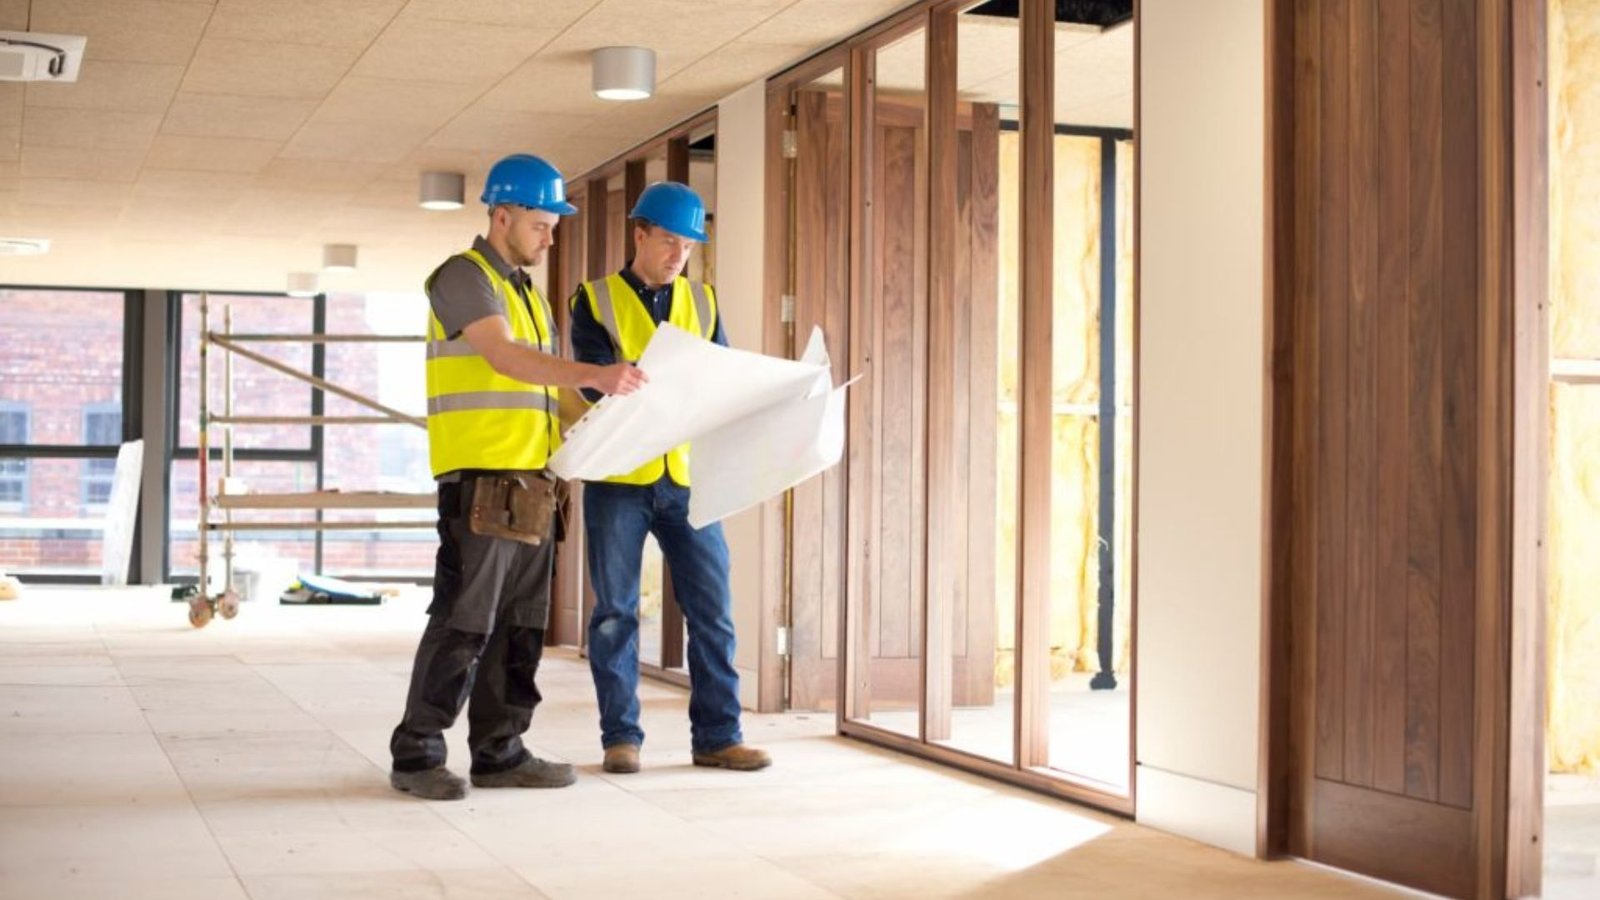 Key Benefits of Hiring Fit-Out Contractors